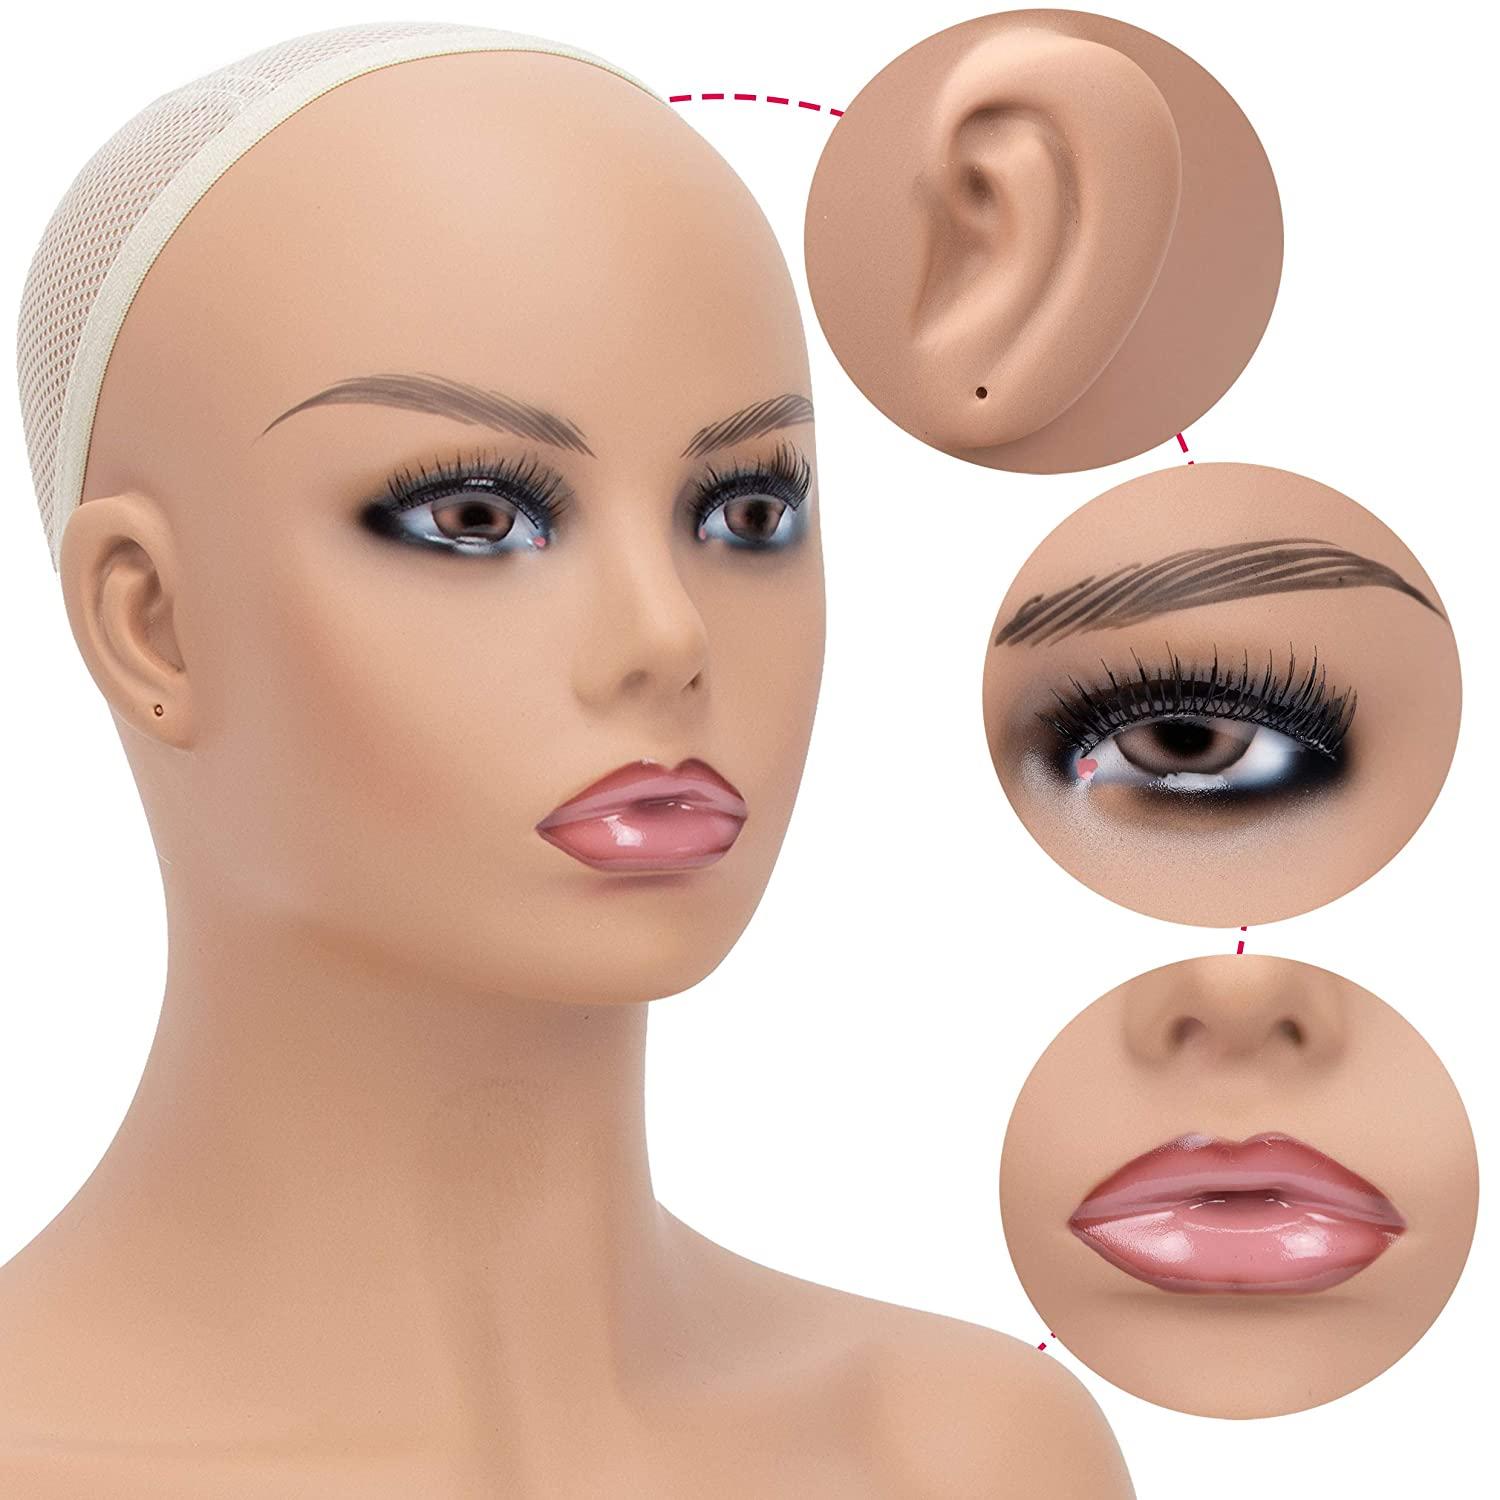 Female Mannequin Head Wig Head Stands Durable Realistic Professional Smooth